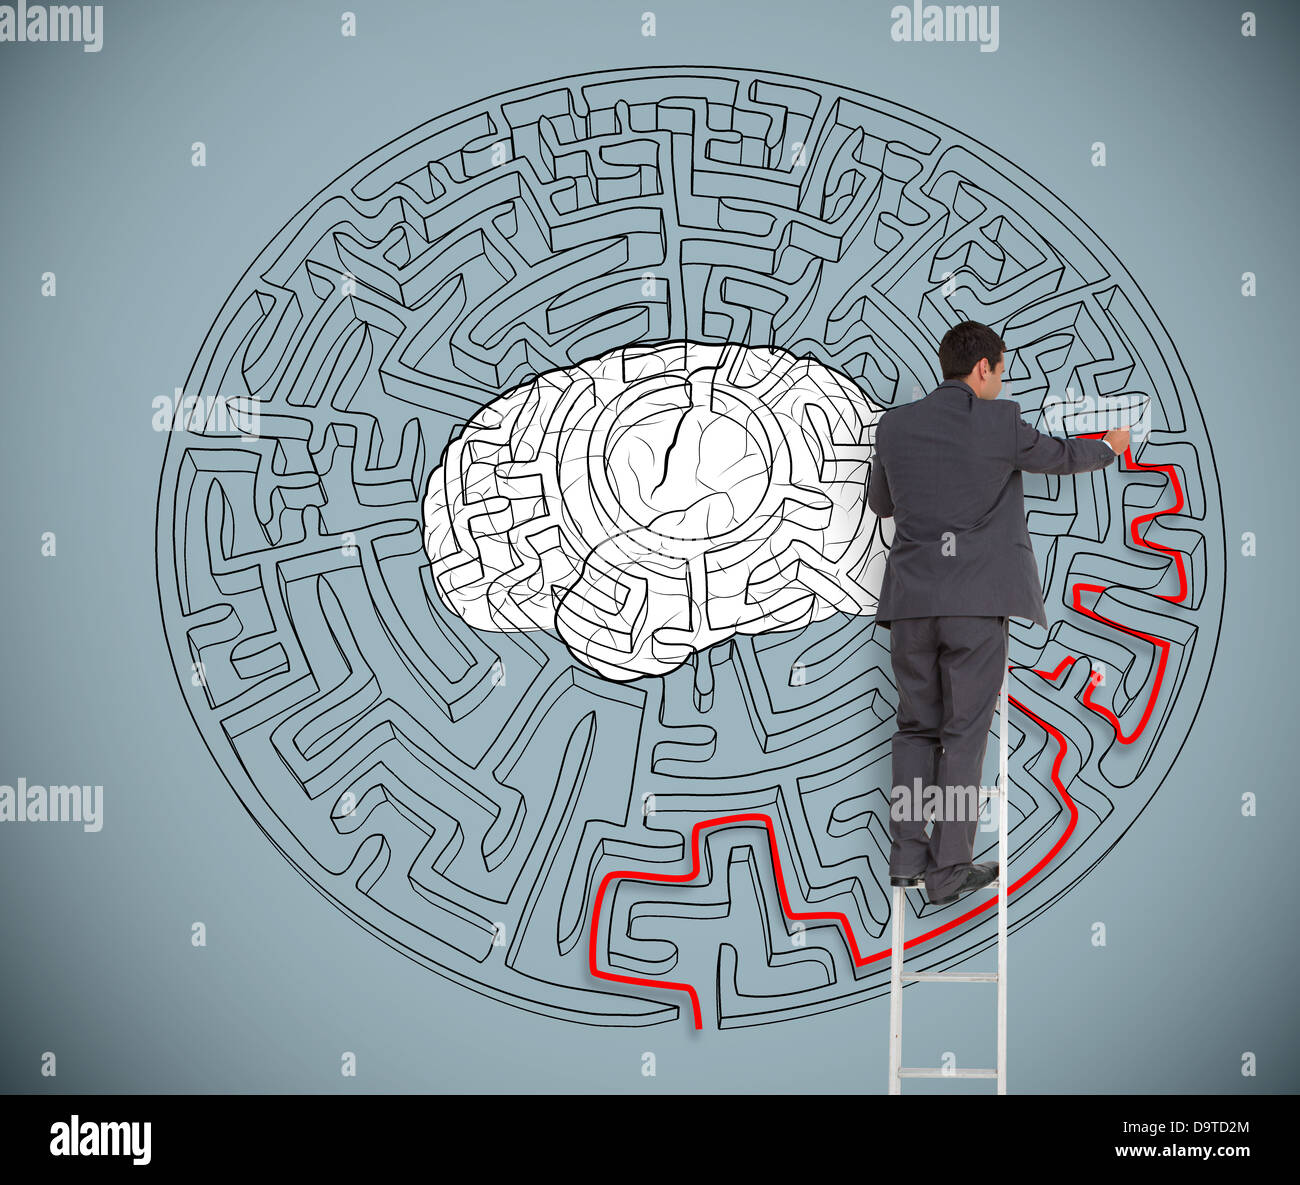 Businessman trying to solve a large maze with a brain illustration Stock Photo